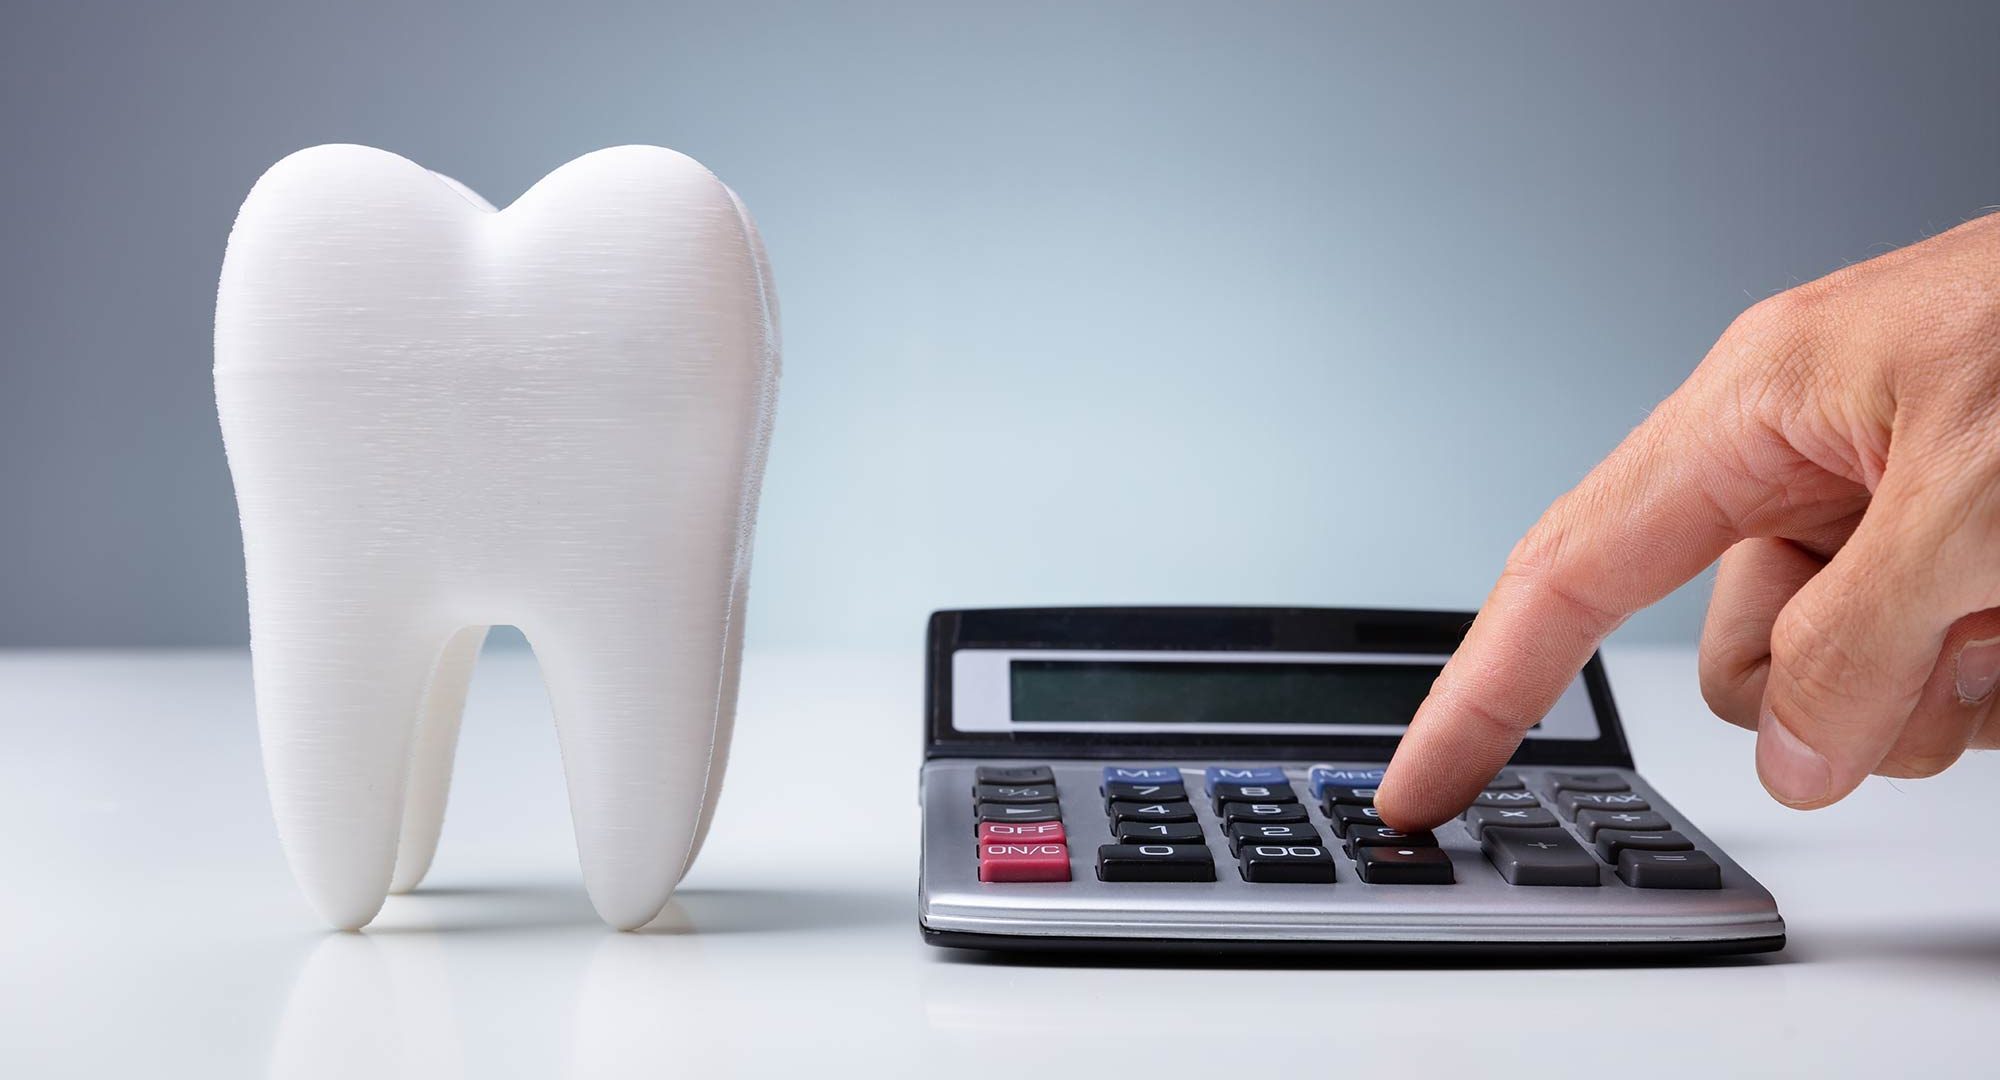 More than one in two (53%) dental professionals said financial worries were having the biggest impact on their mental health during the pandemic, a survey reveals